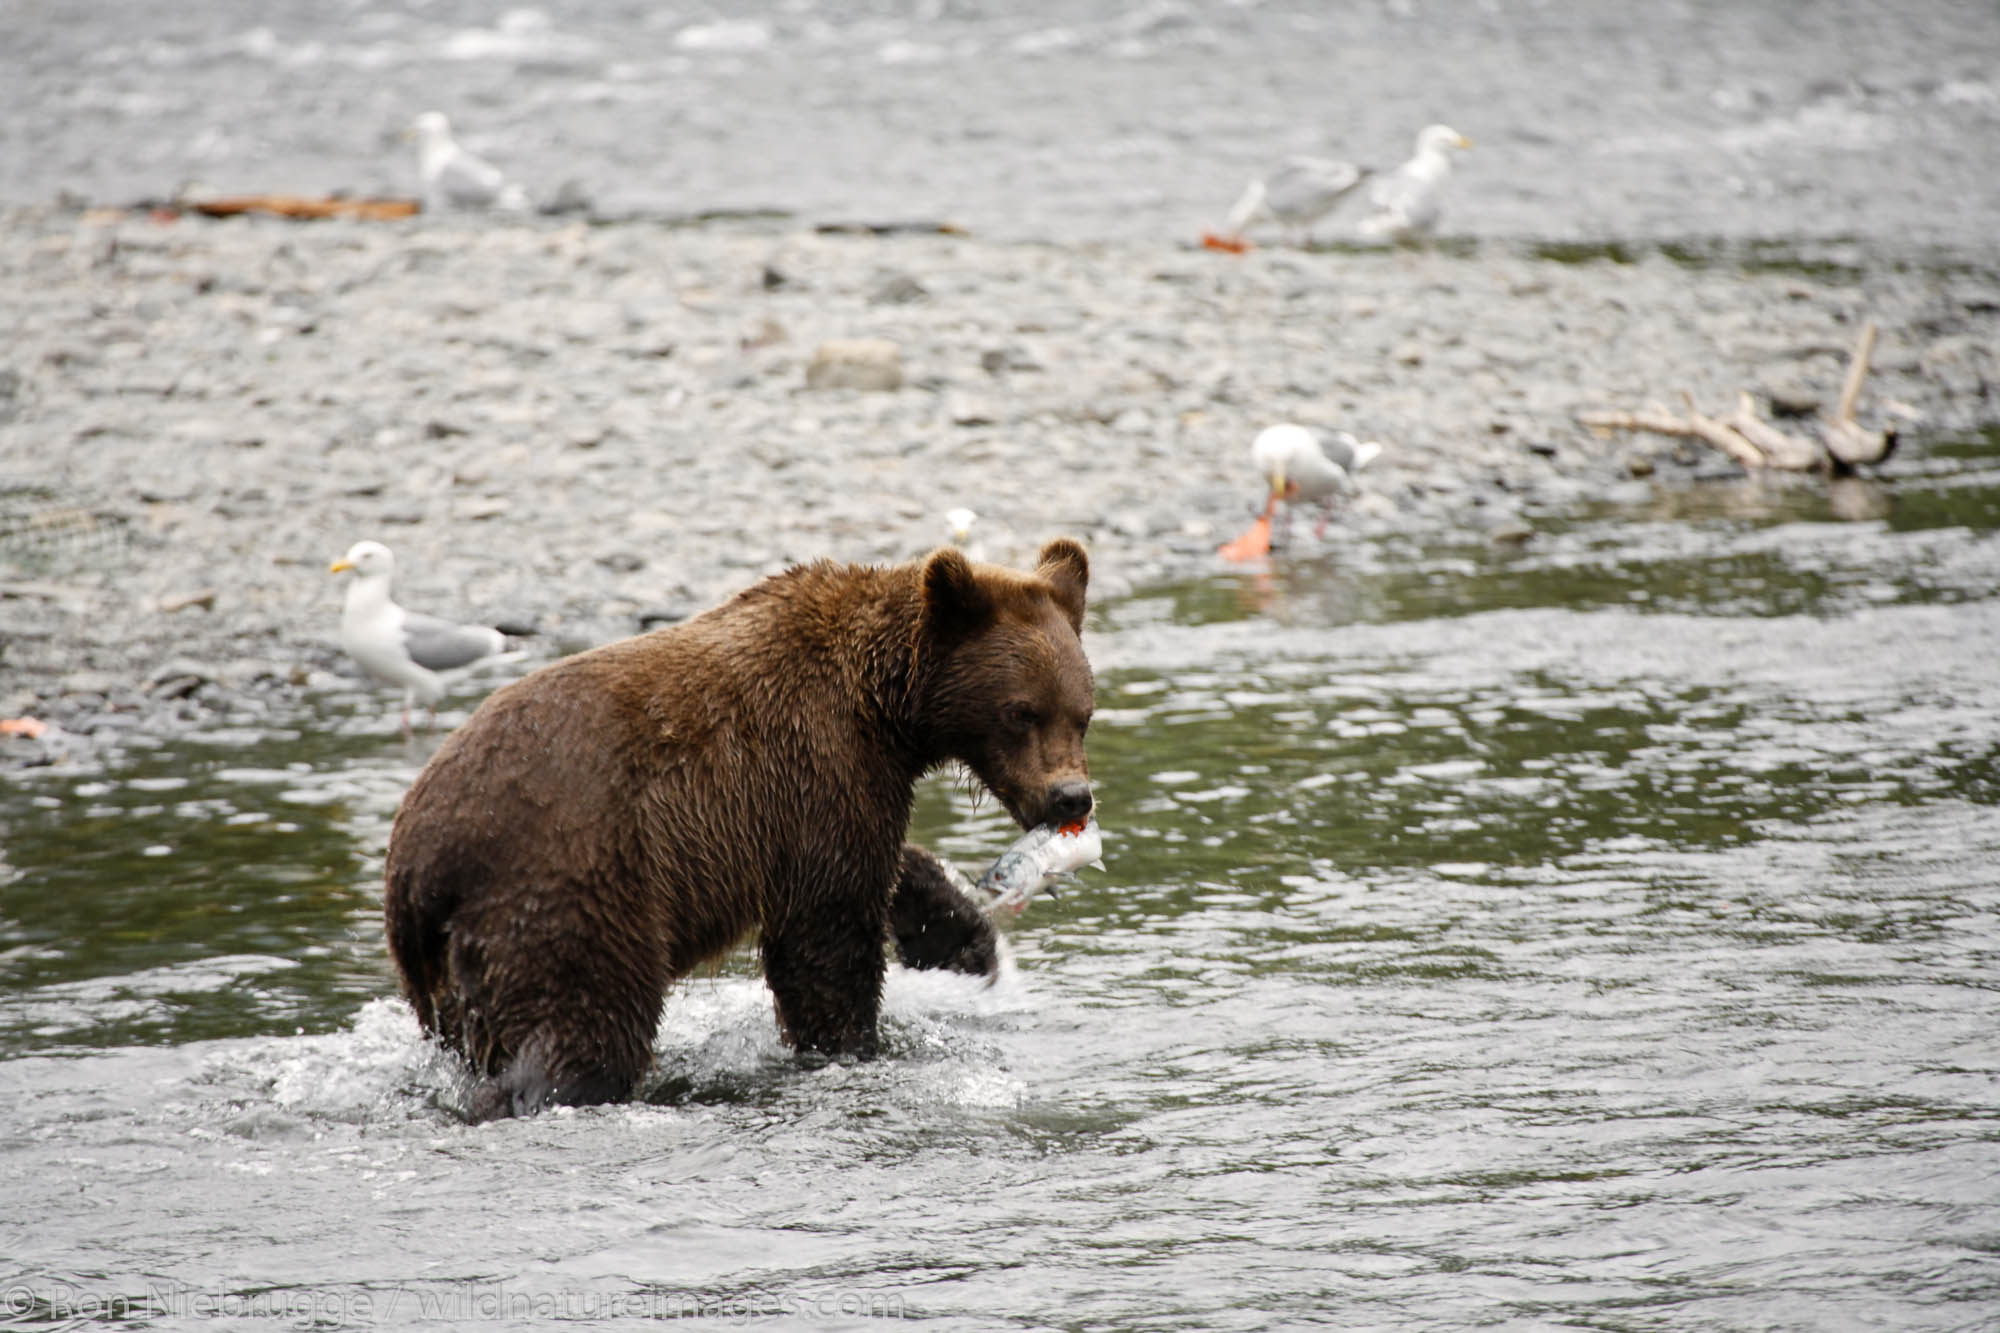 Grizzly Bear catches a salmon at the Russian River, Kenai Peninsula, Chugach National Forest, Alaska.